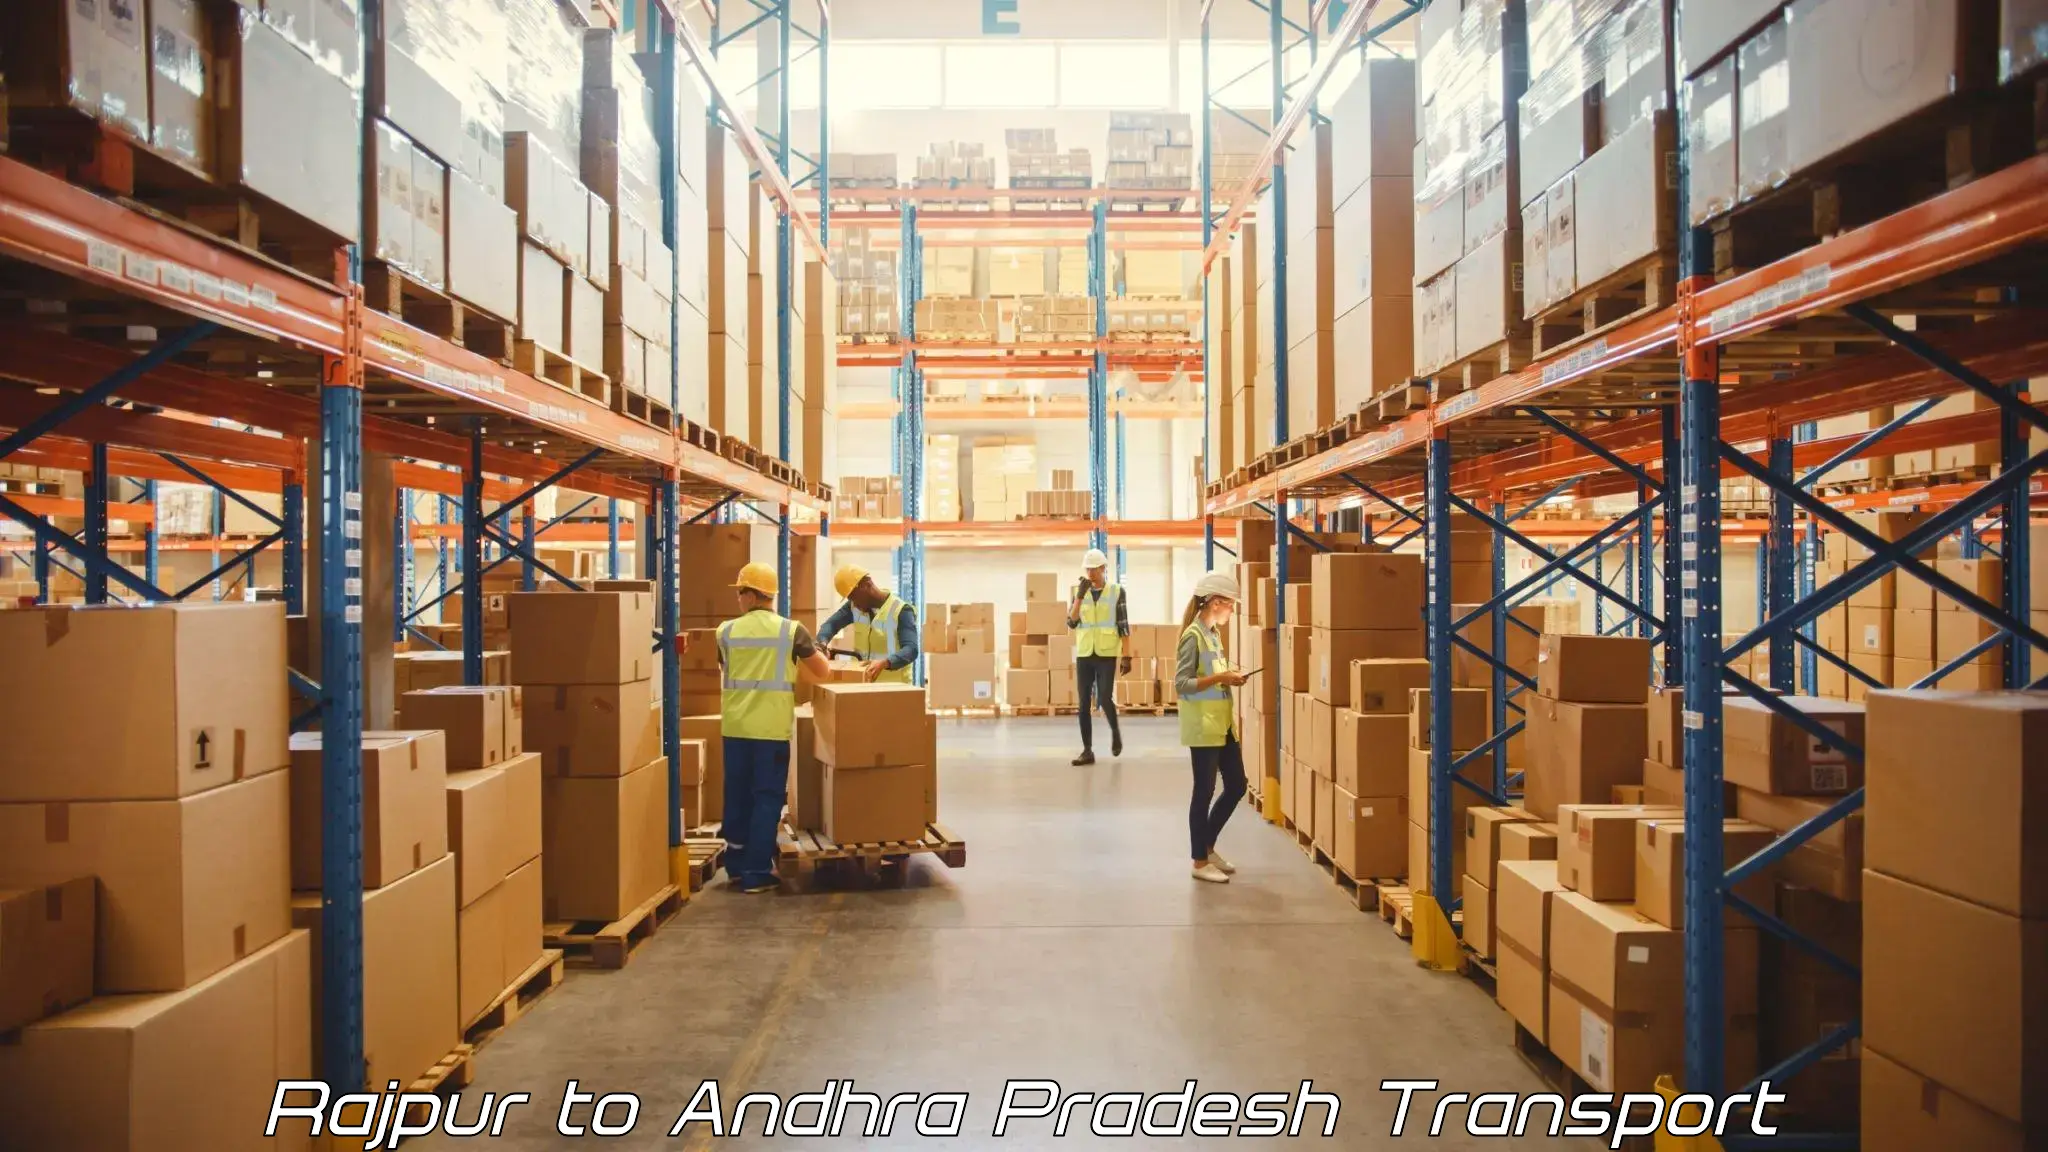 Air freight transport services in Rajpur to Andhra Pradesh